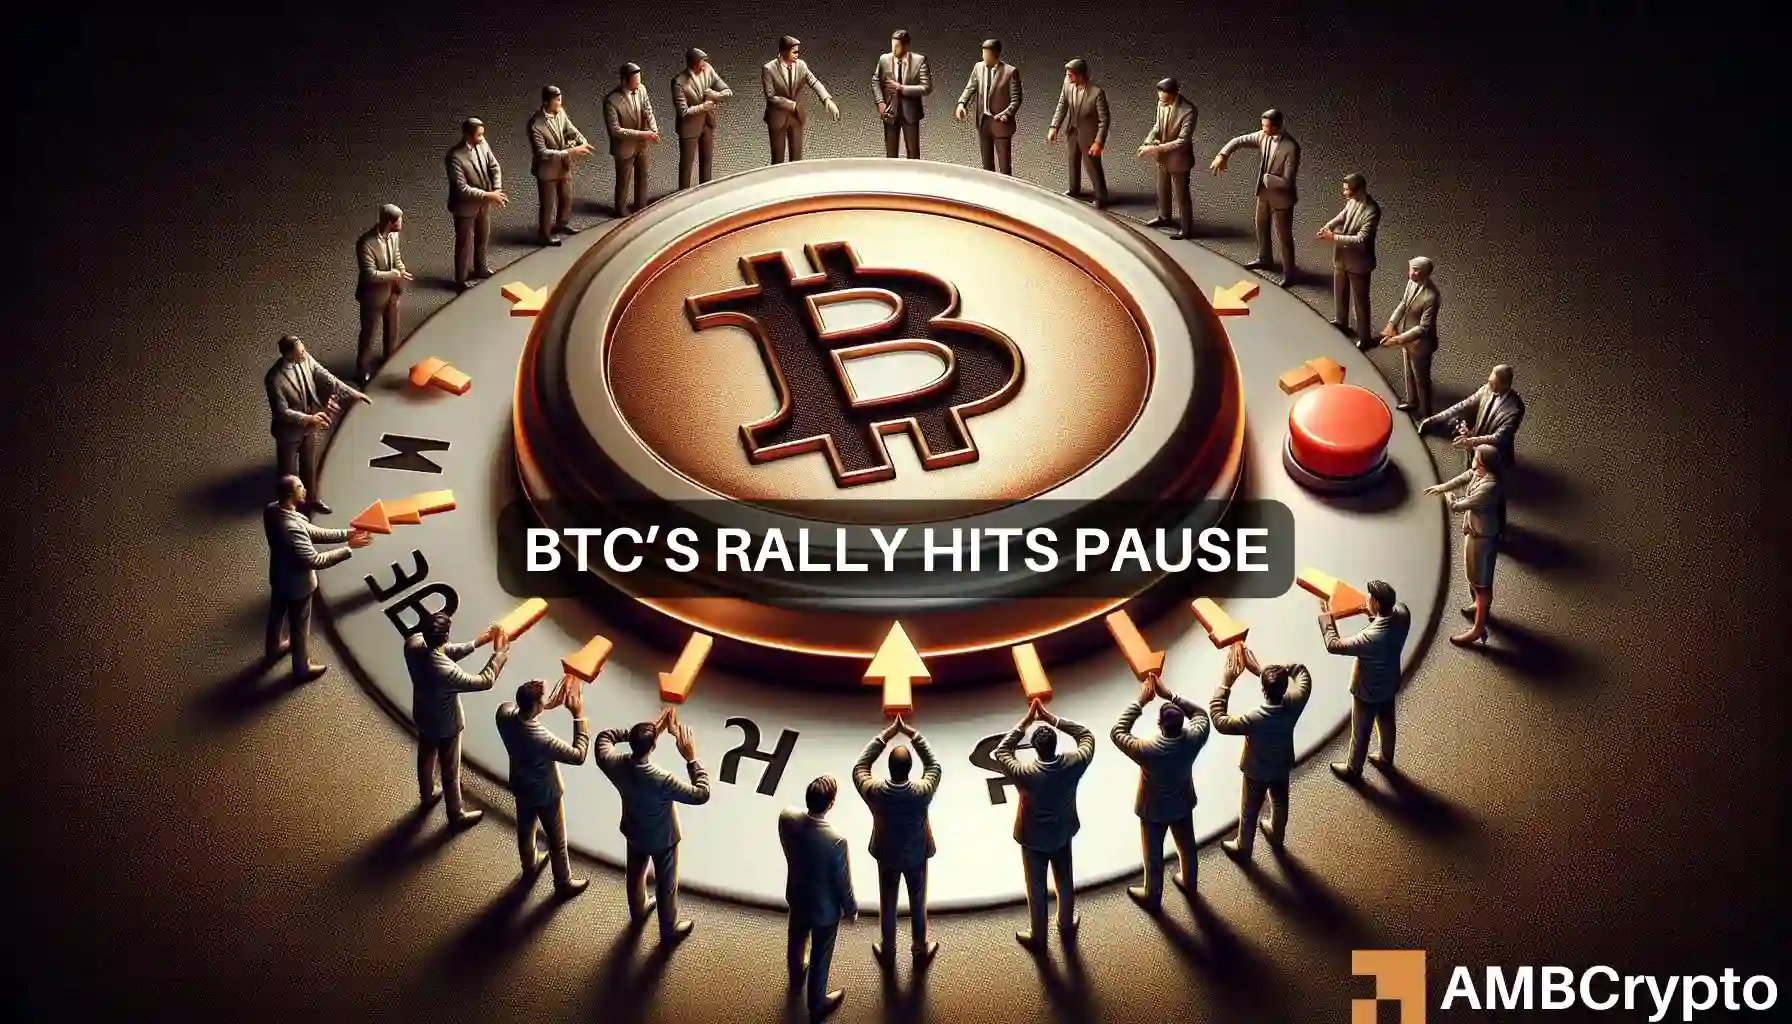 Bitcoin’s rally comes to a halt – Examining the effects of this sell signal